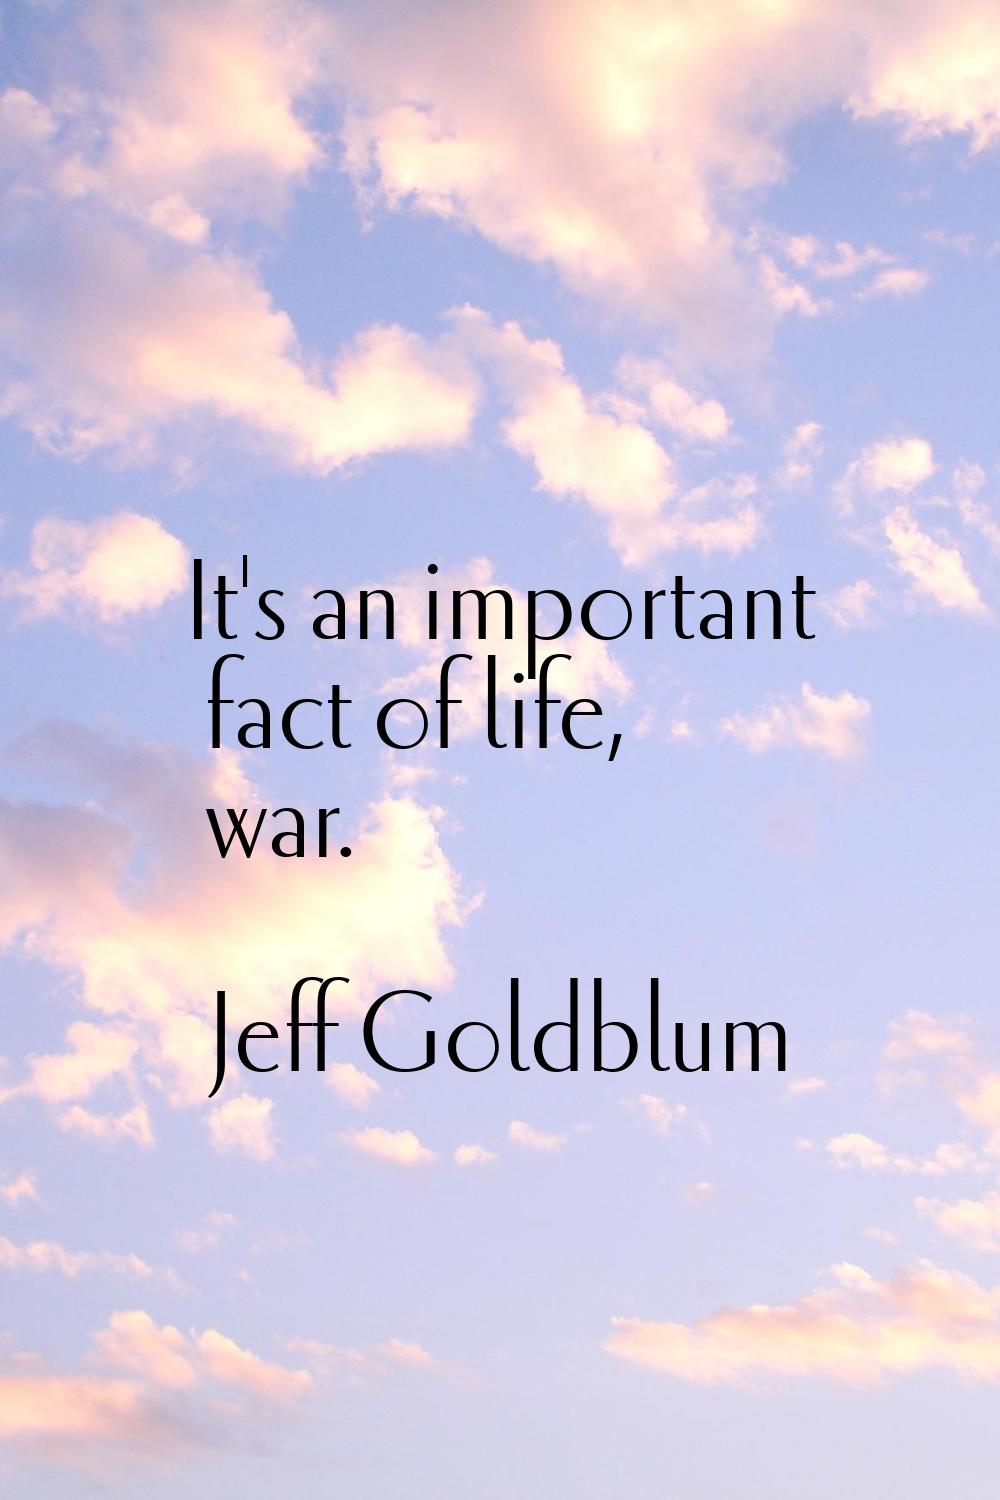 It's an important fact of life, war.